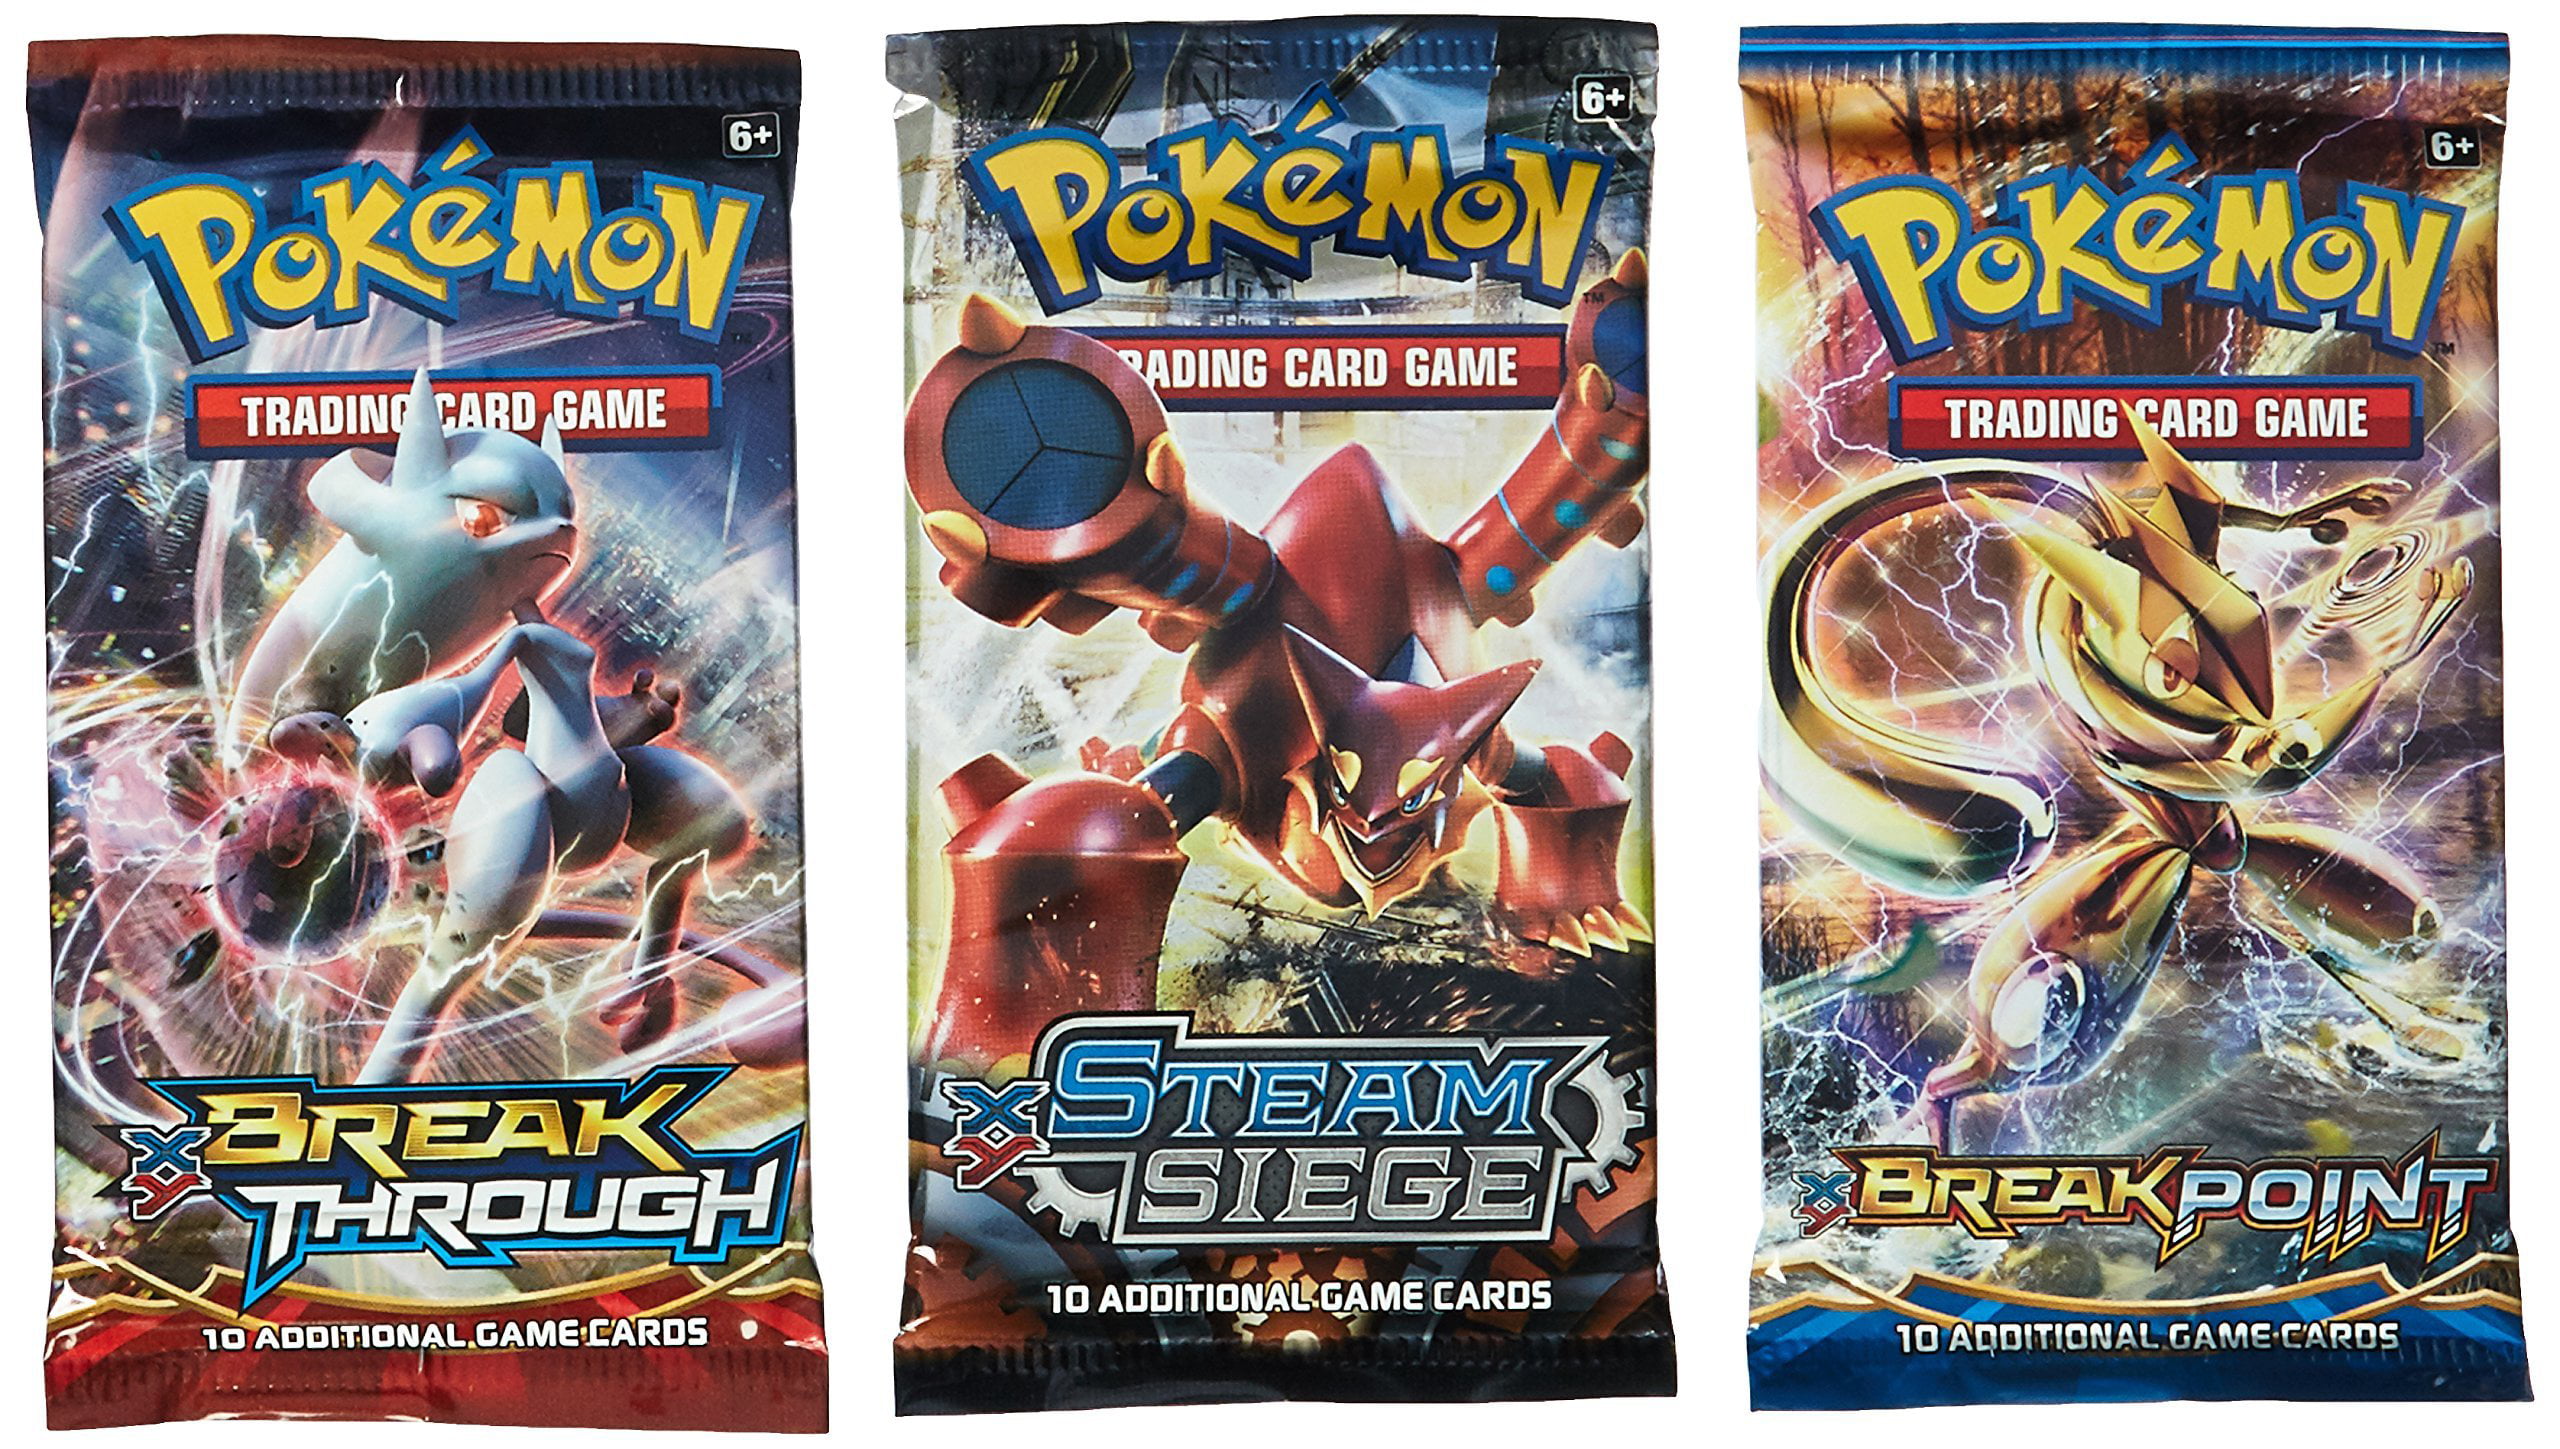 Pokemon TCG: 3 Booster Packs – 30 Cards Total| Value Pack Includes 3